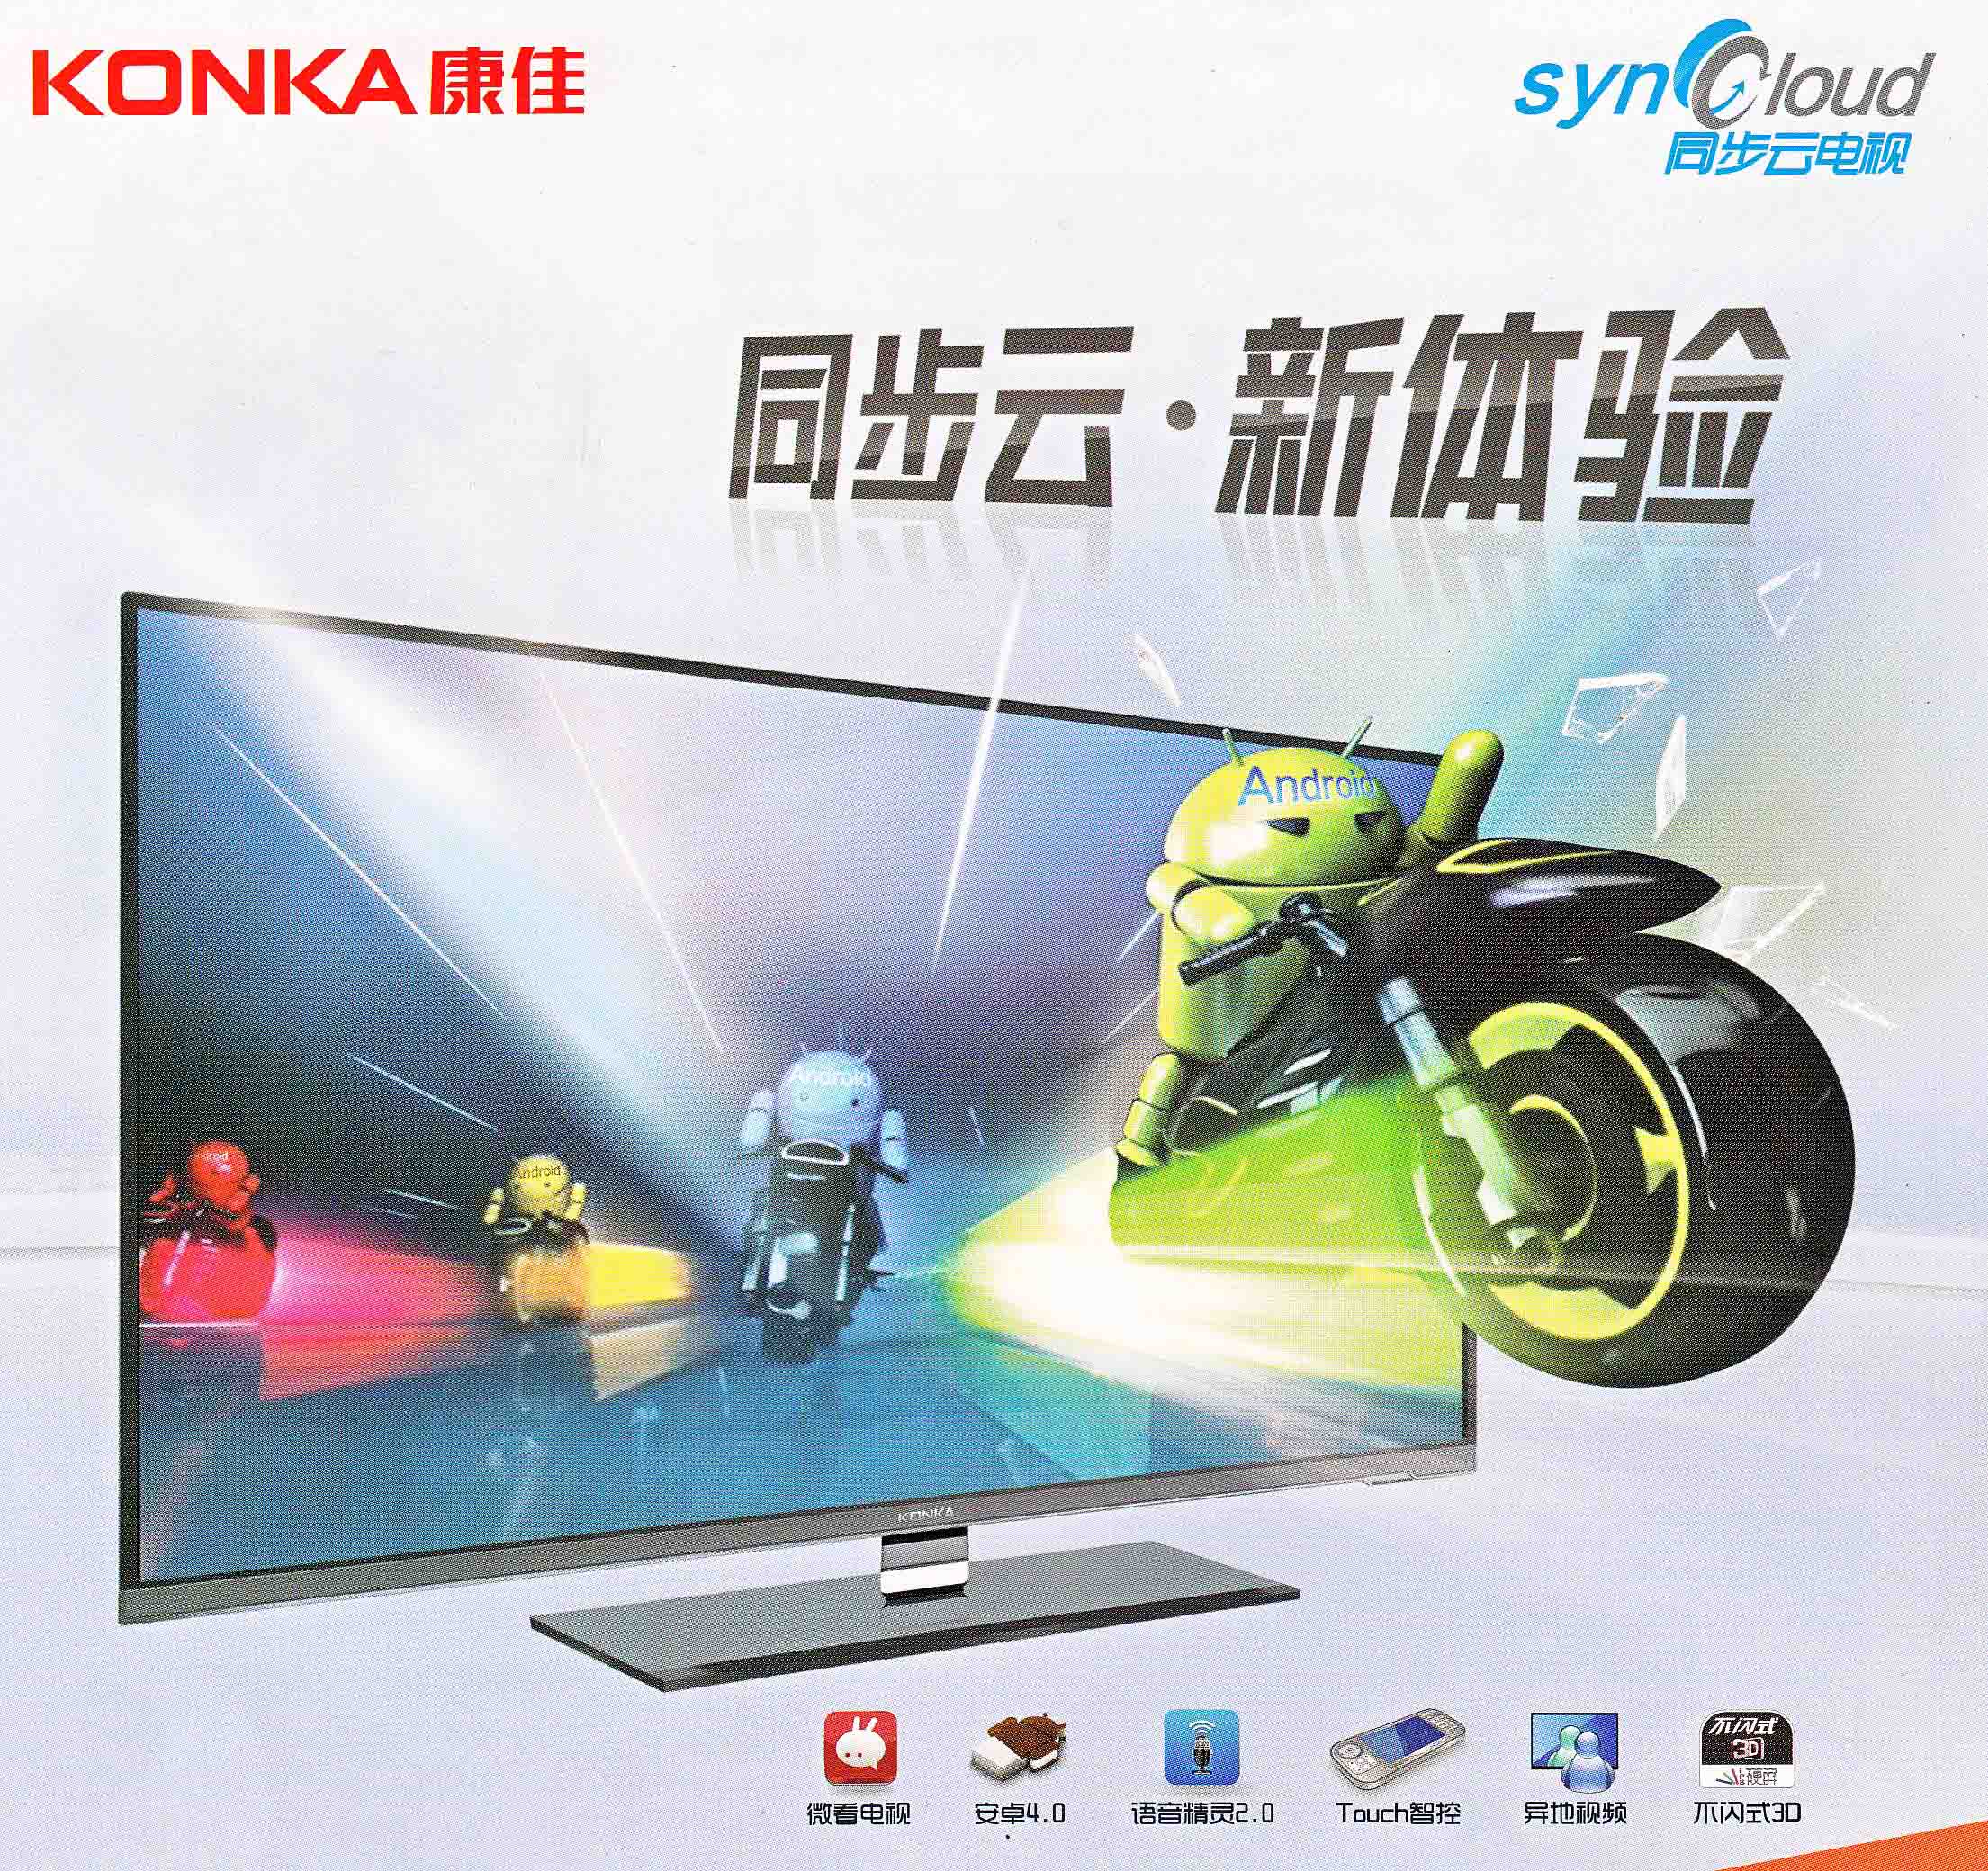 KONKA 42 3D ANDROID 4.0 TV large image 0